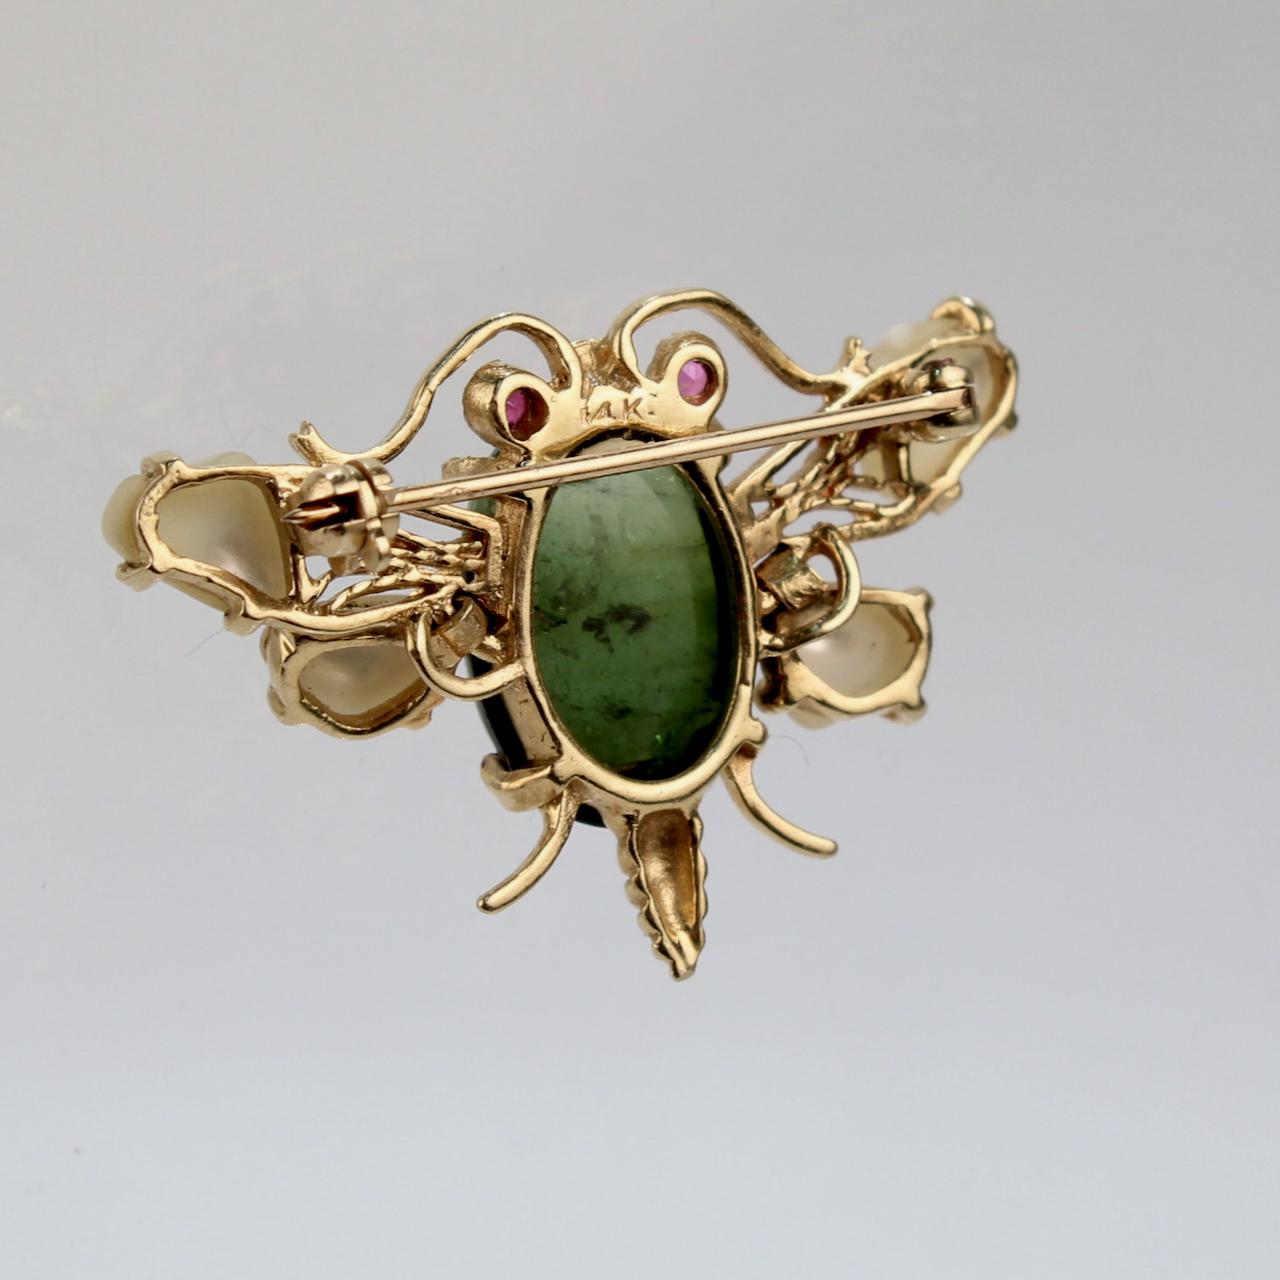 14 Karat Gold and Green Tourmaline Kinetic Bee Brooch with Pearls and Rubies For Sale 2